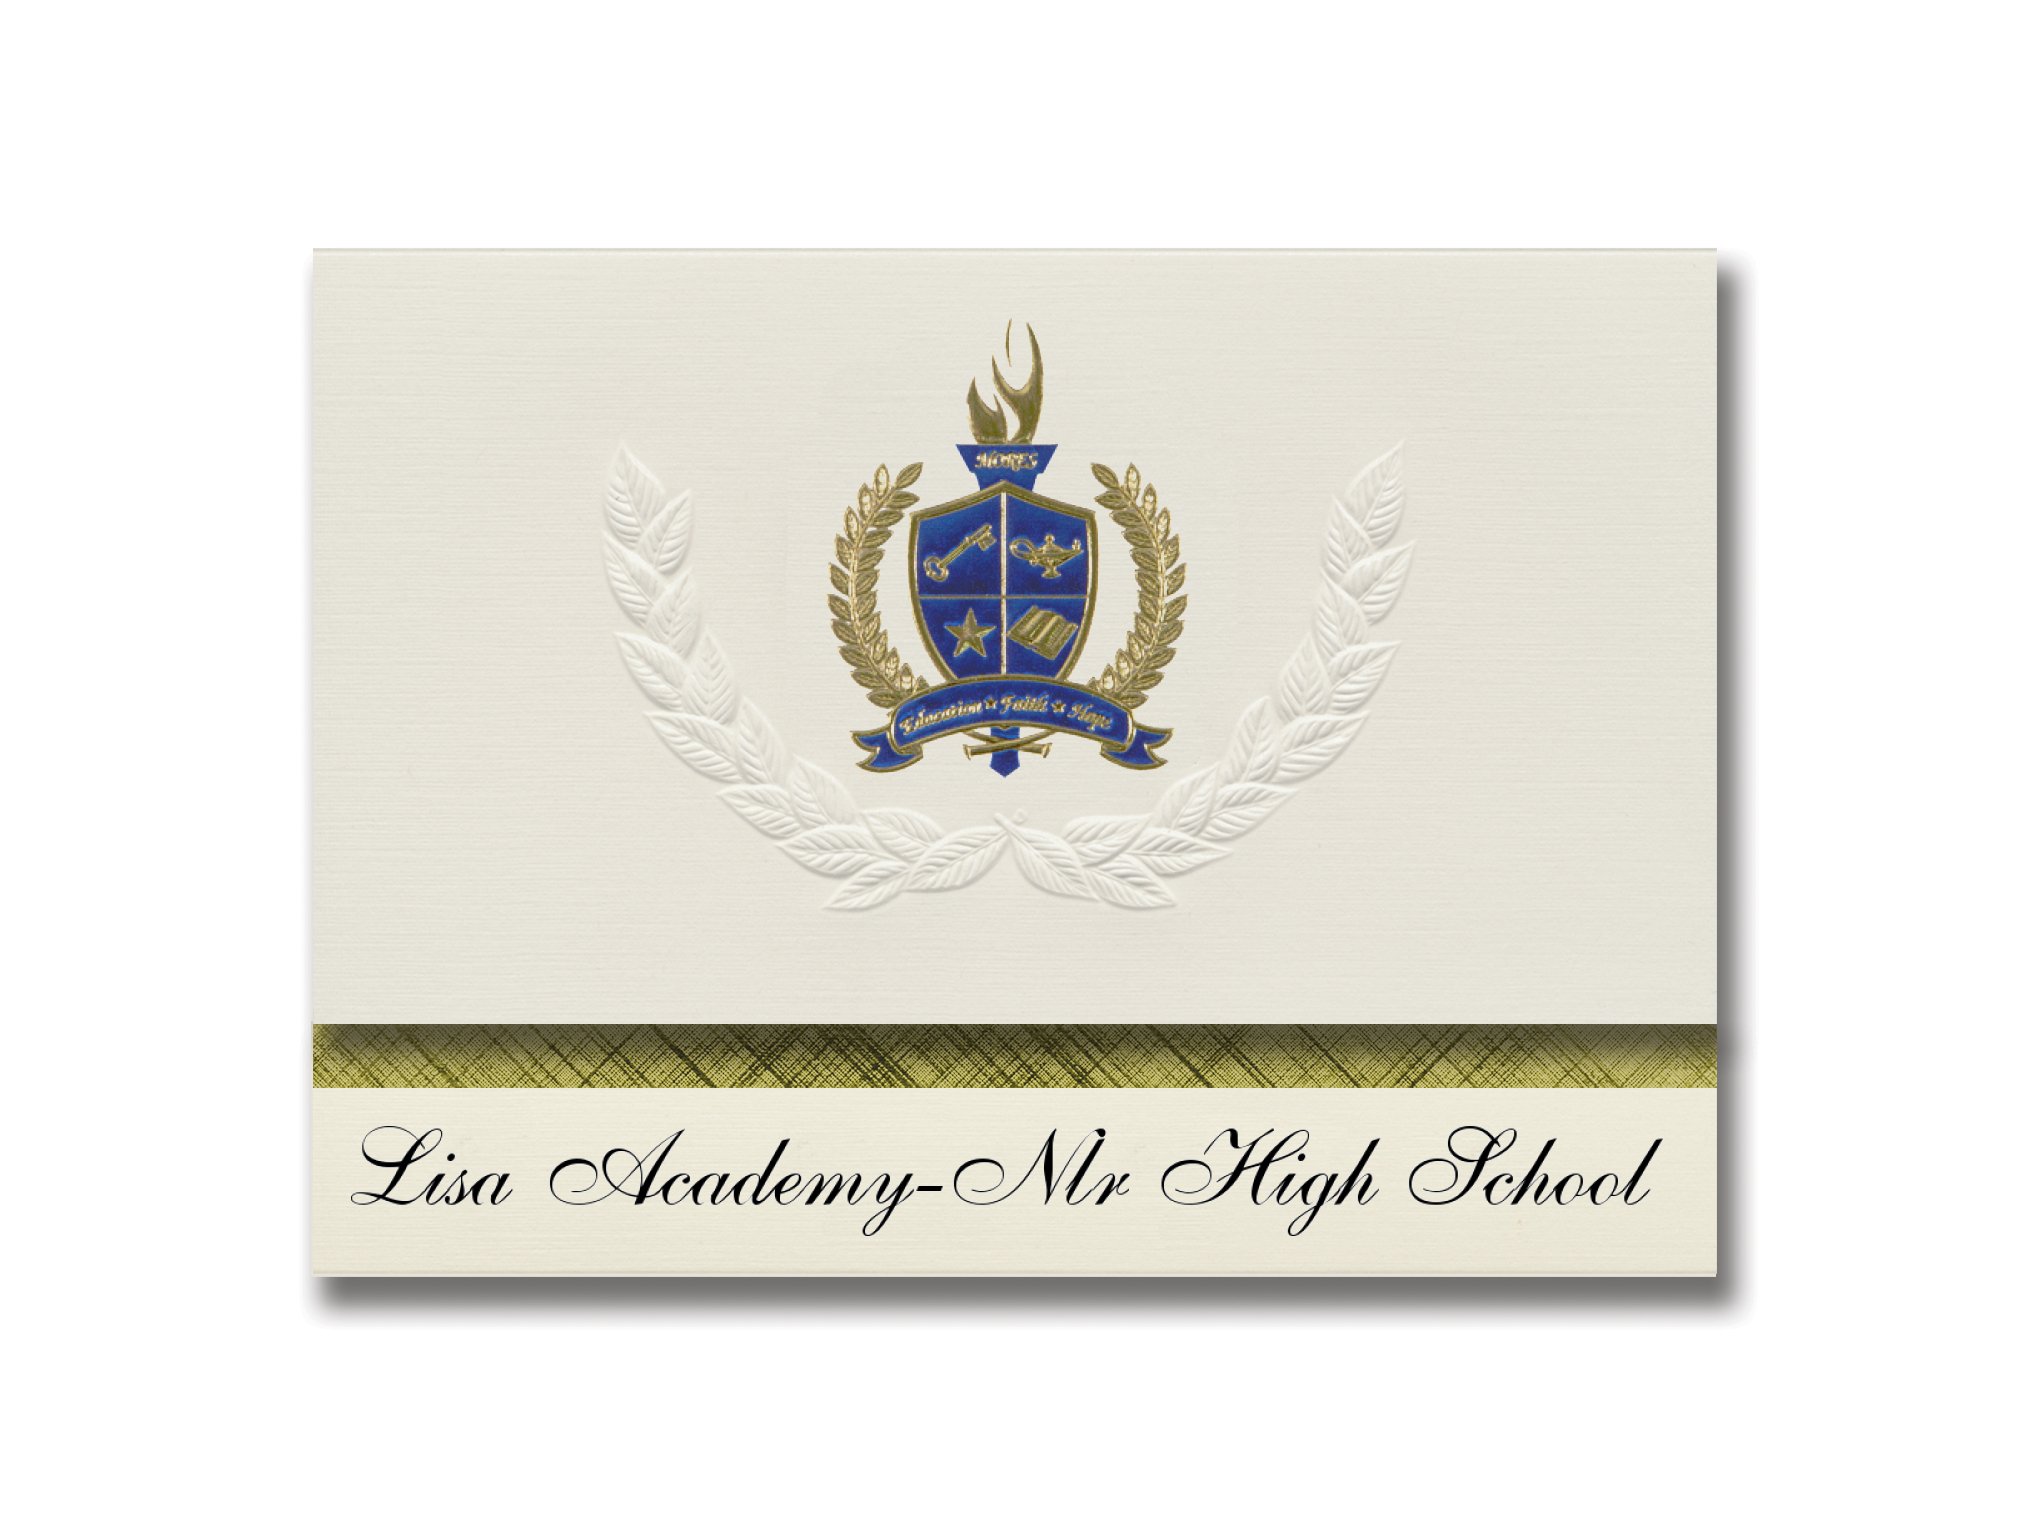 Signature Announcements Lisa Academy-Nlr High School (Sherwood, AR) Graduation Announcements, Presidential style, Elite package of 25 with Gold & B...